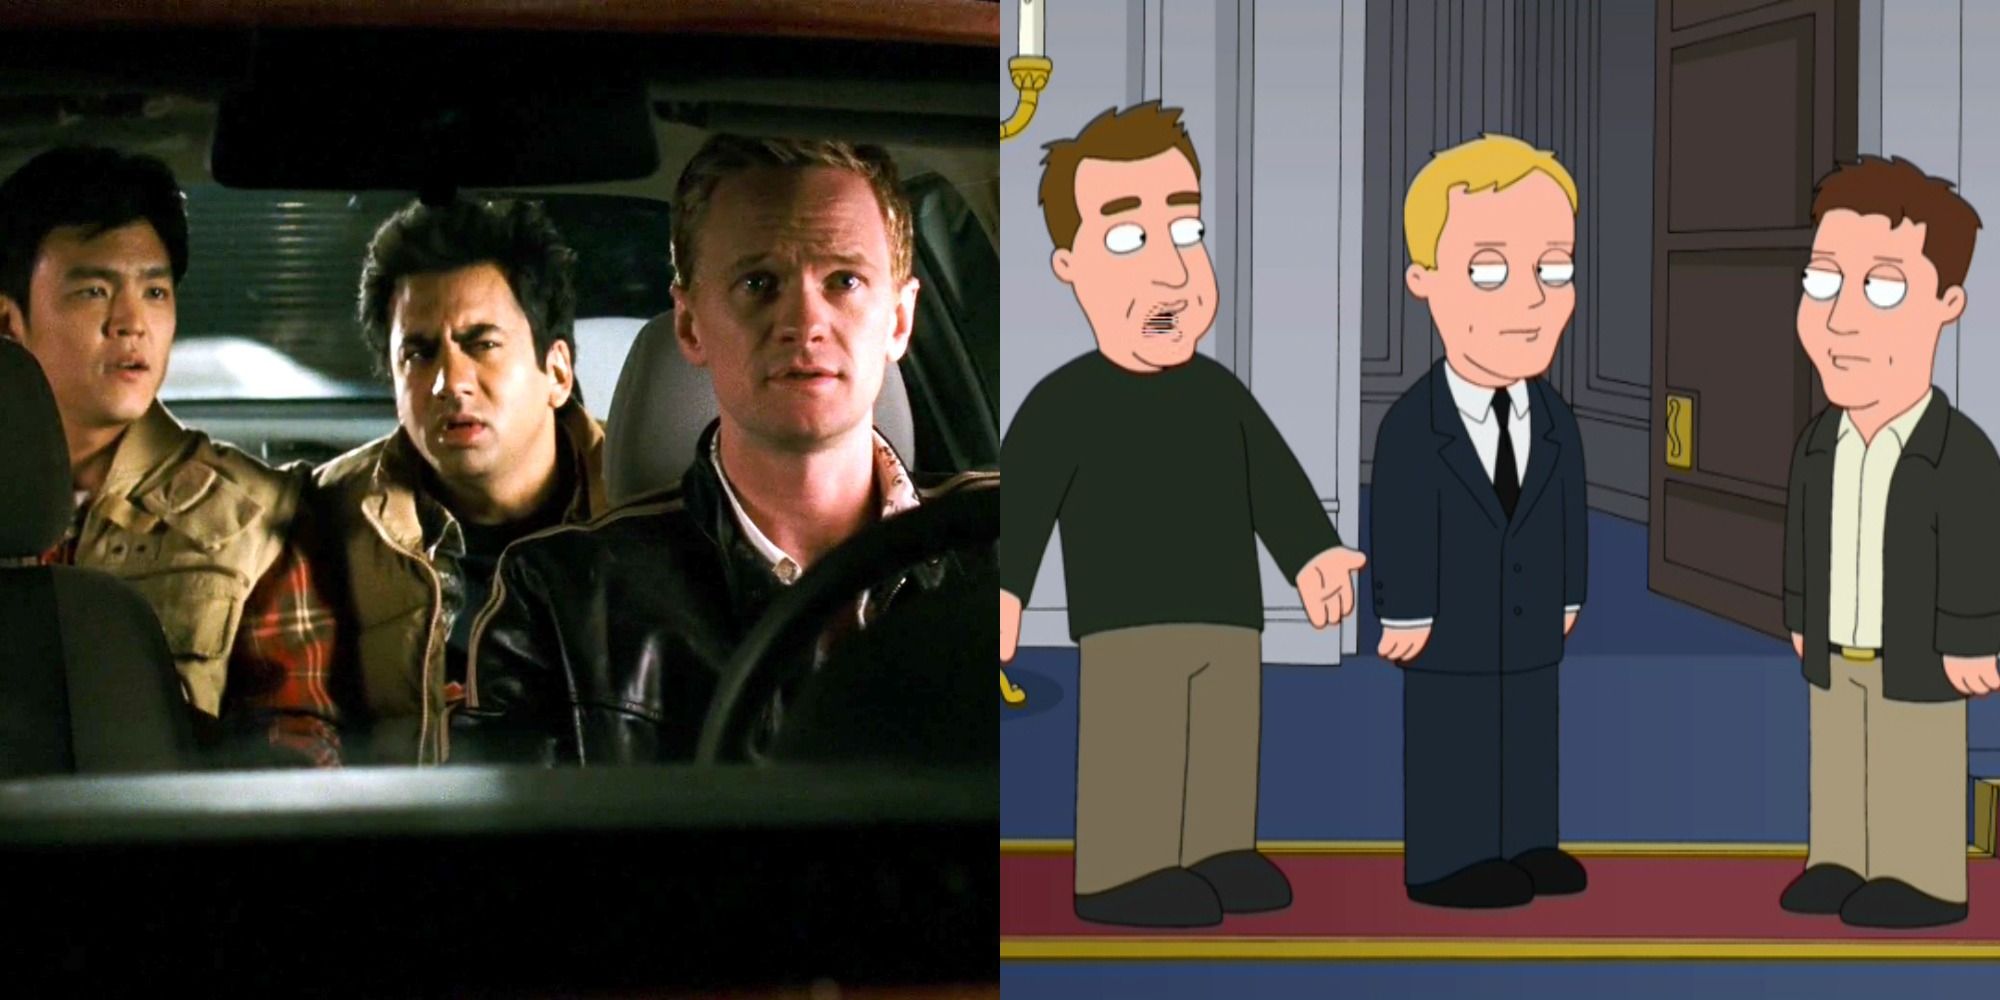 Split image showing the Neil Patrick Harris with Harold and Kumar, and the male cast of HIMYM in Family Guy